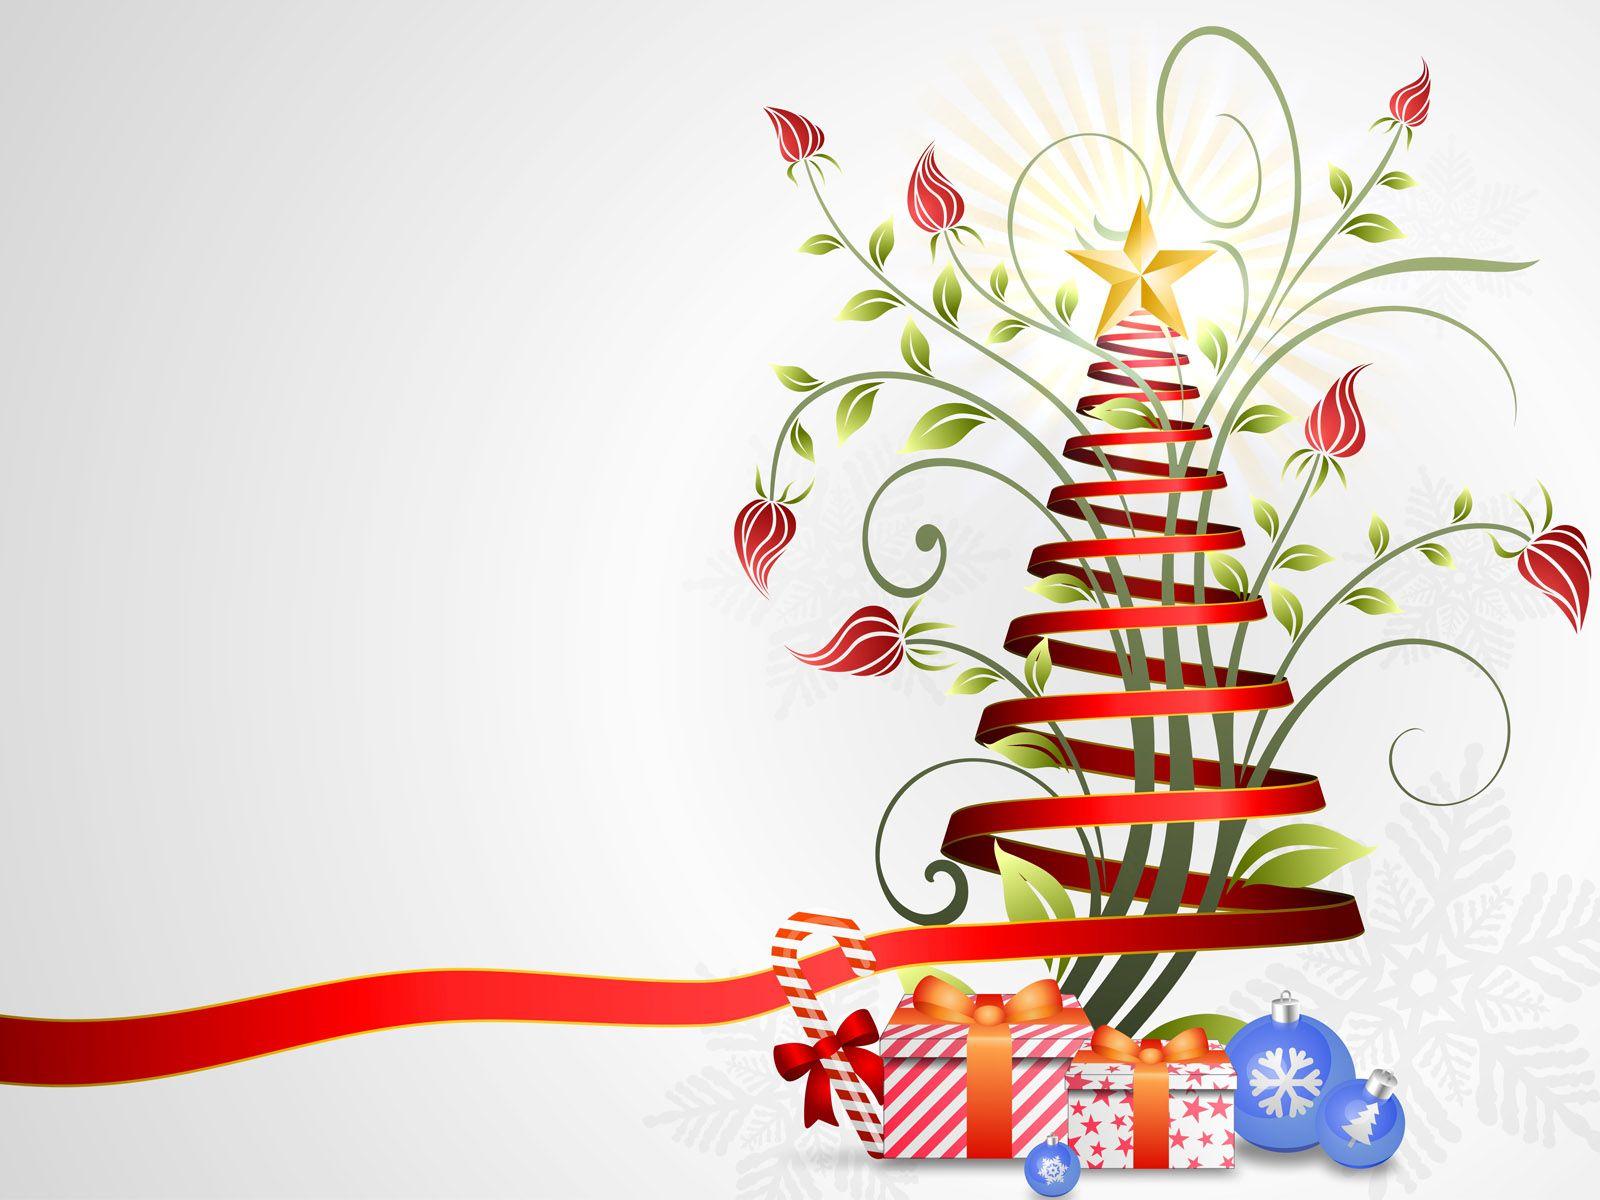 Power Point Background: Ribbon Christmas